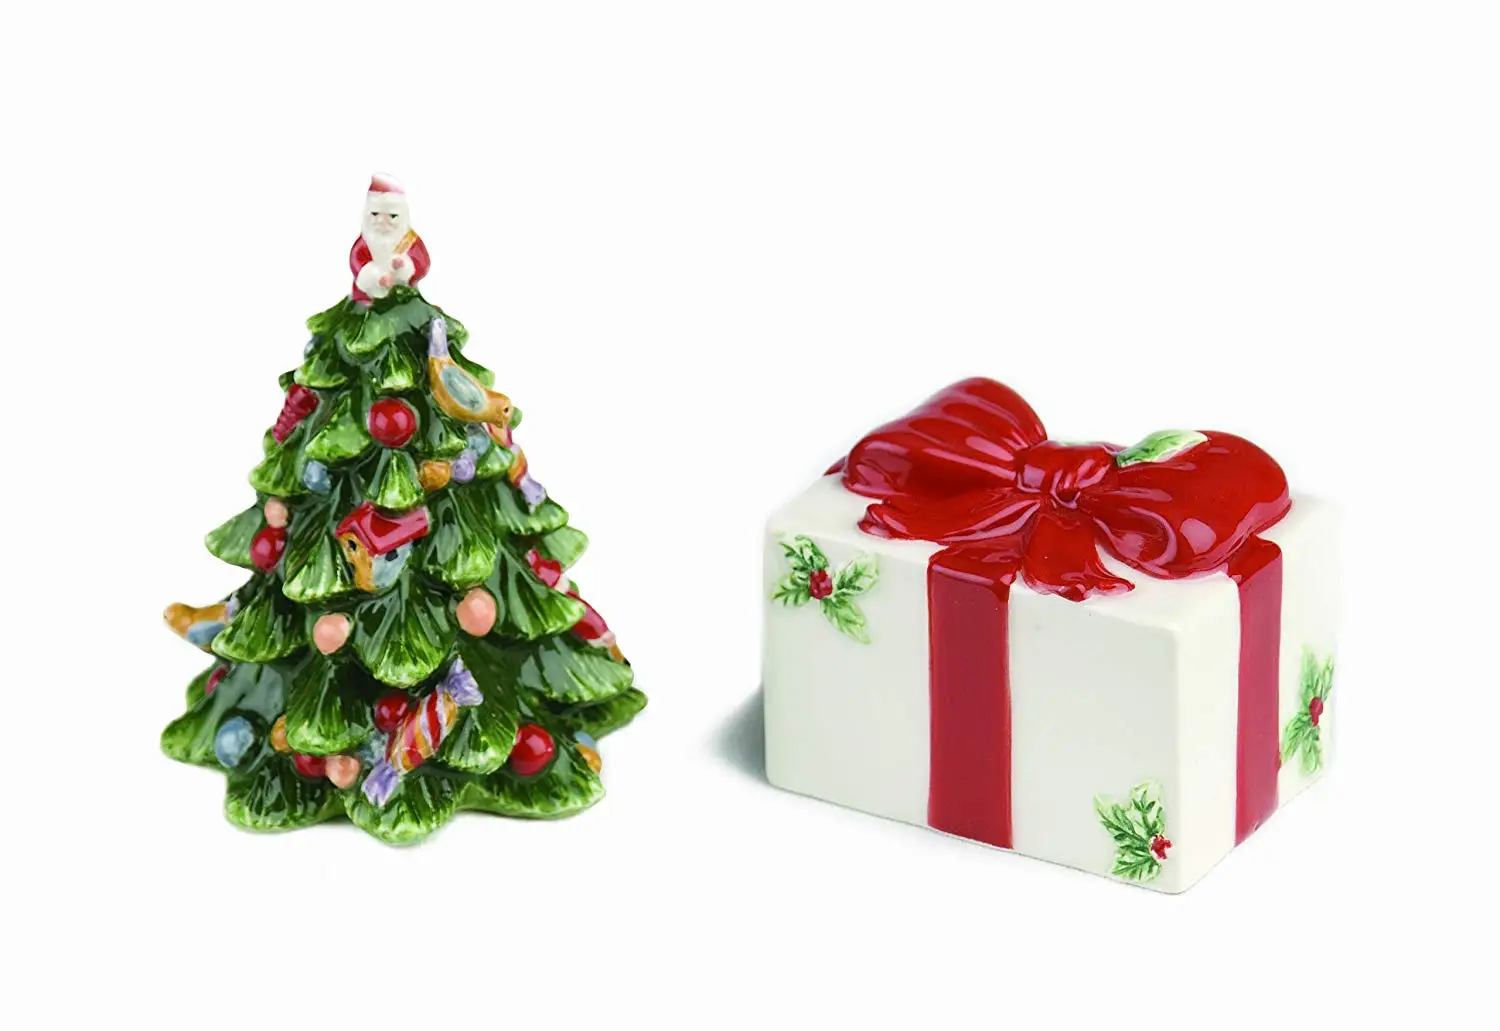 Buy Spode Christmas Tree Tree Salt and Pepper Gift Box Set, Gold in Cheap Price on Alibaba.com